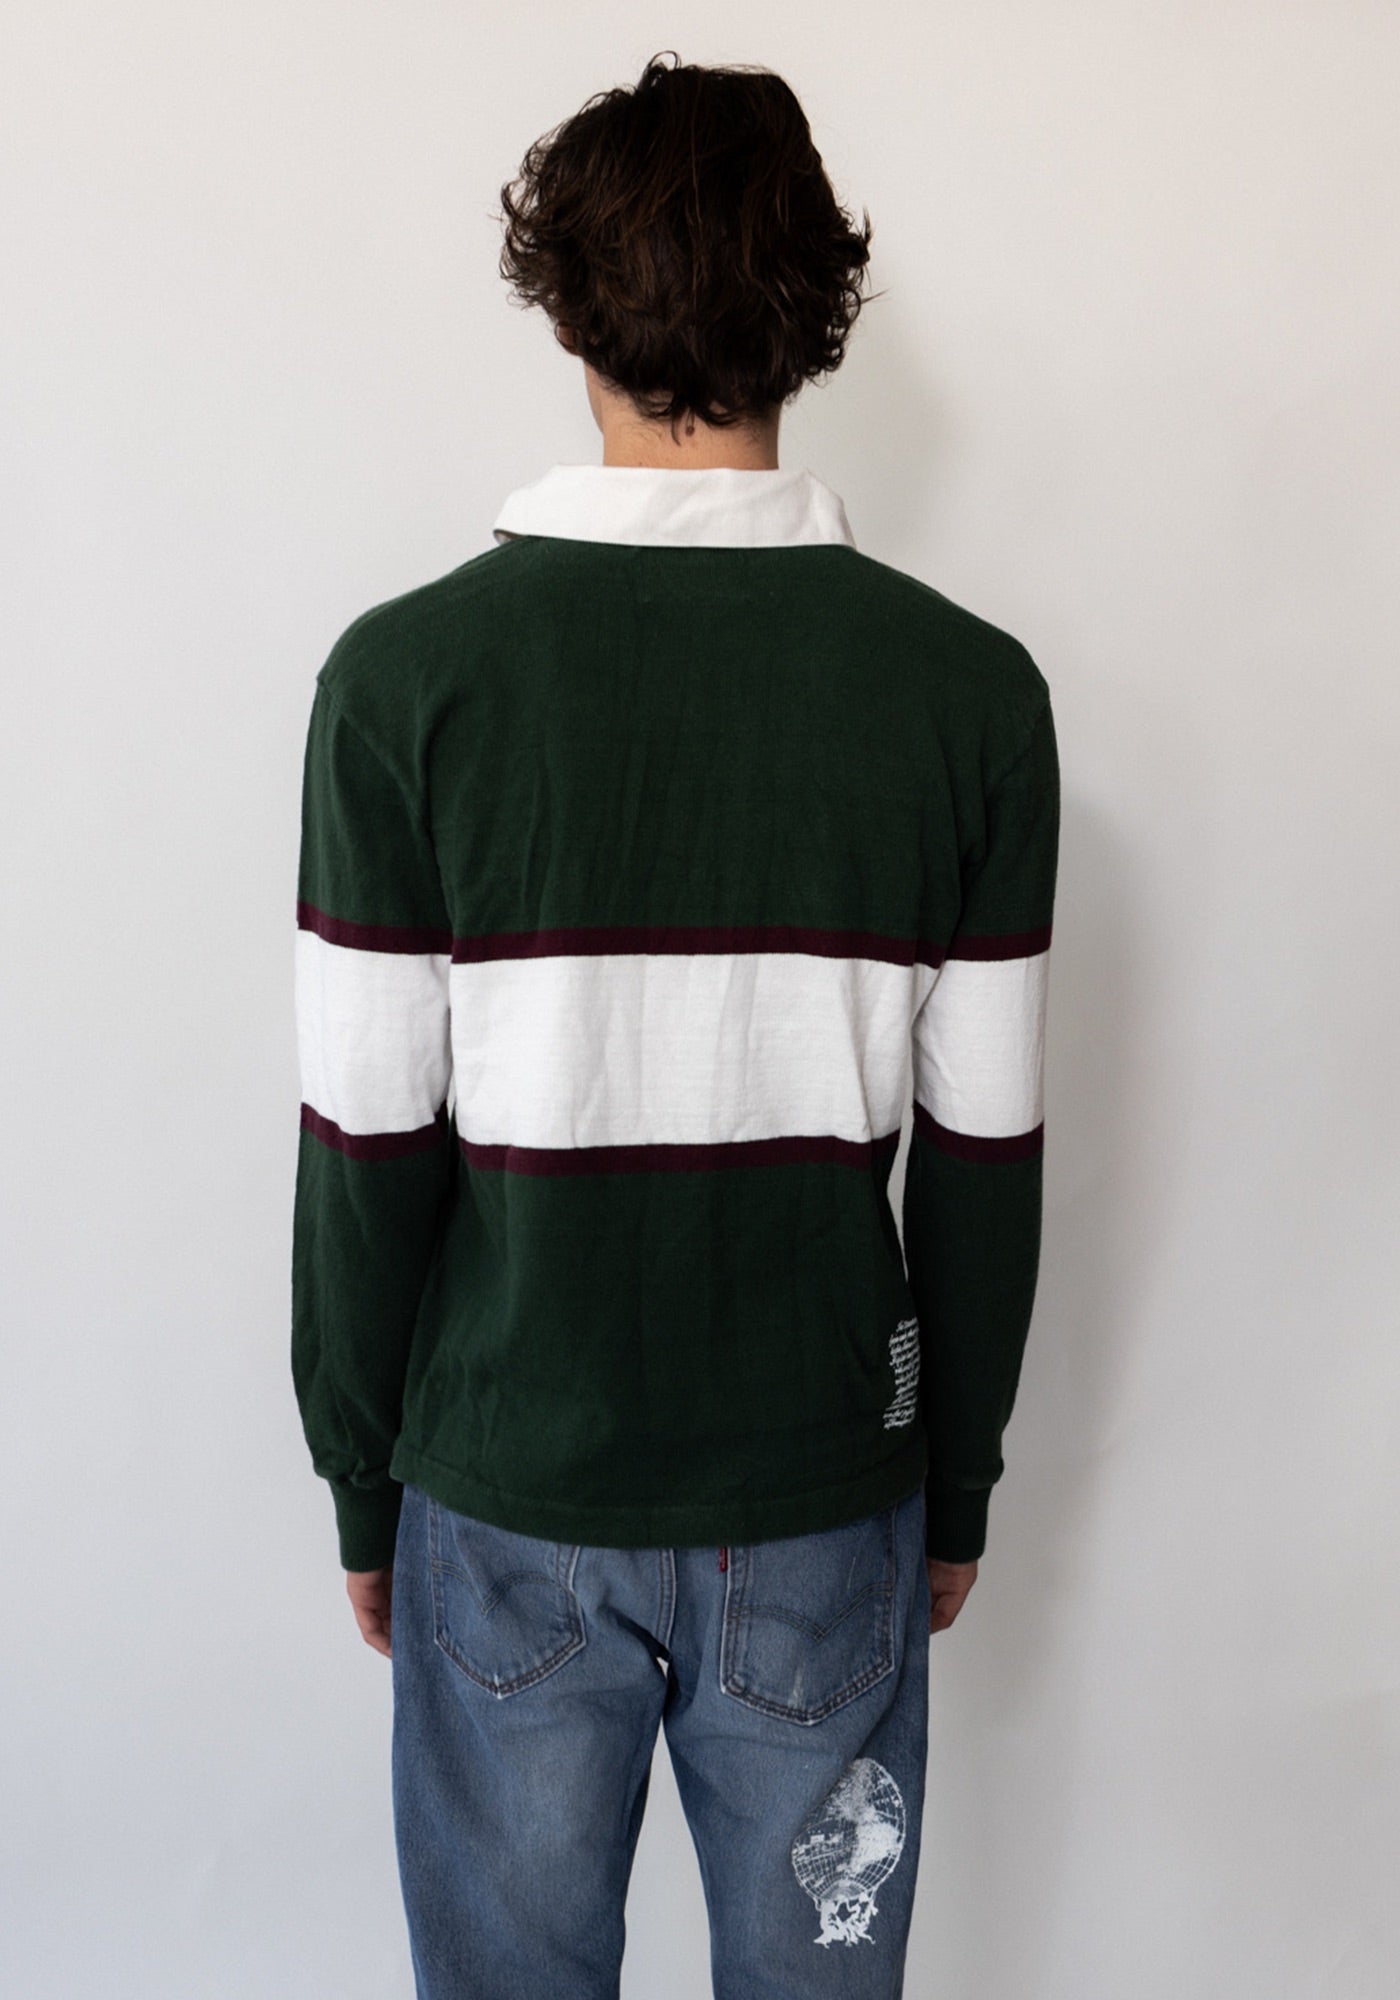 Green Striped #63 Rugby Shirt